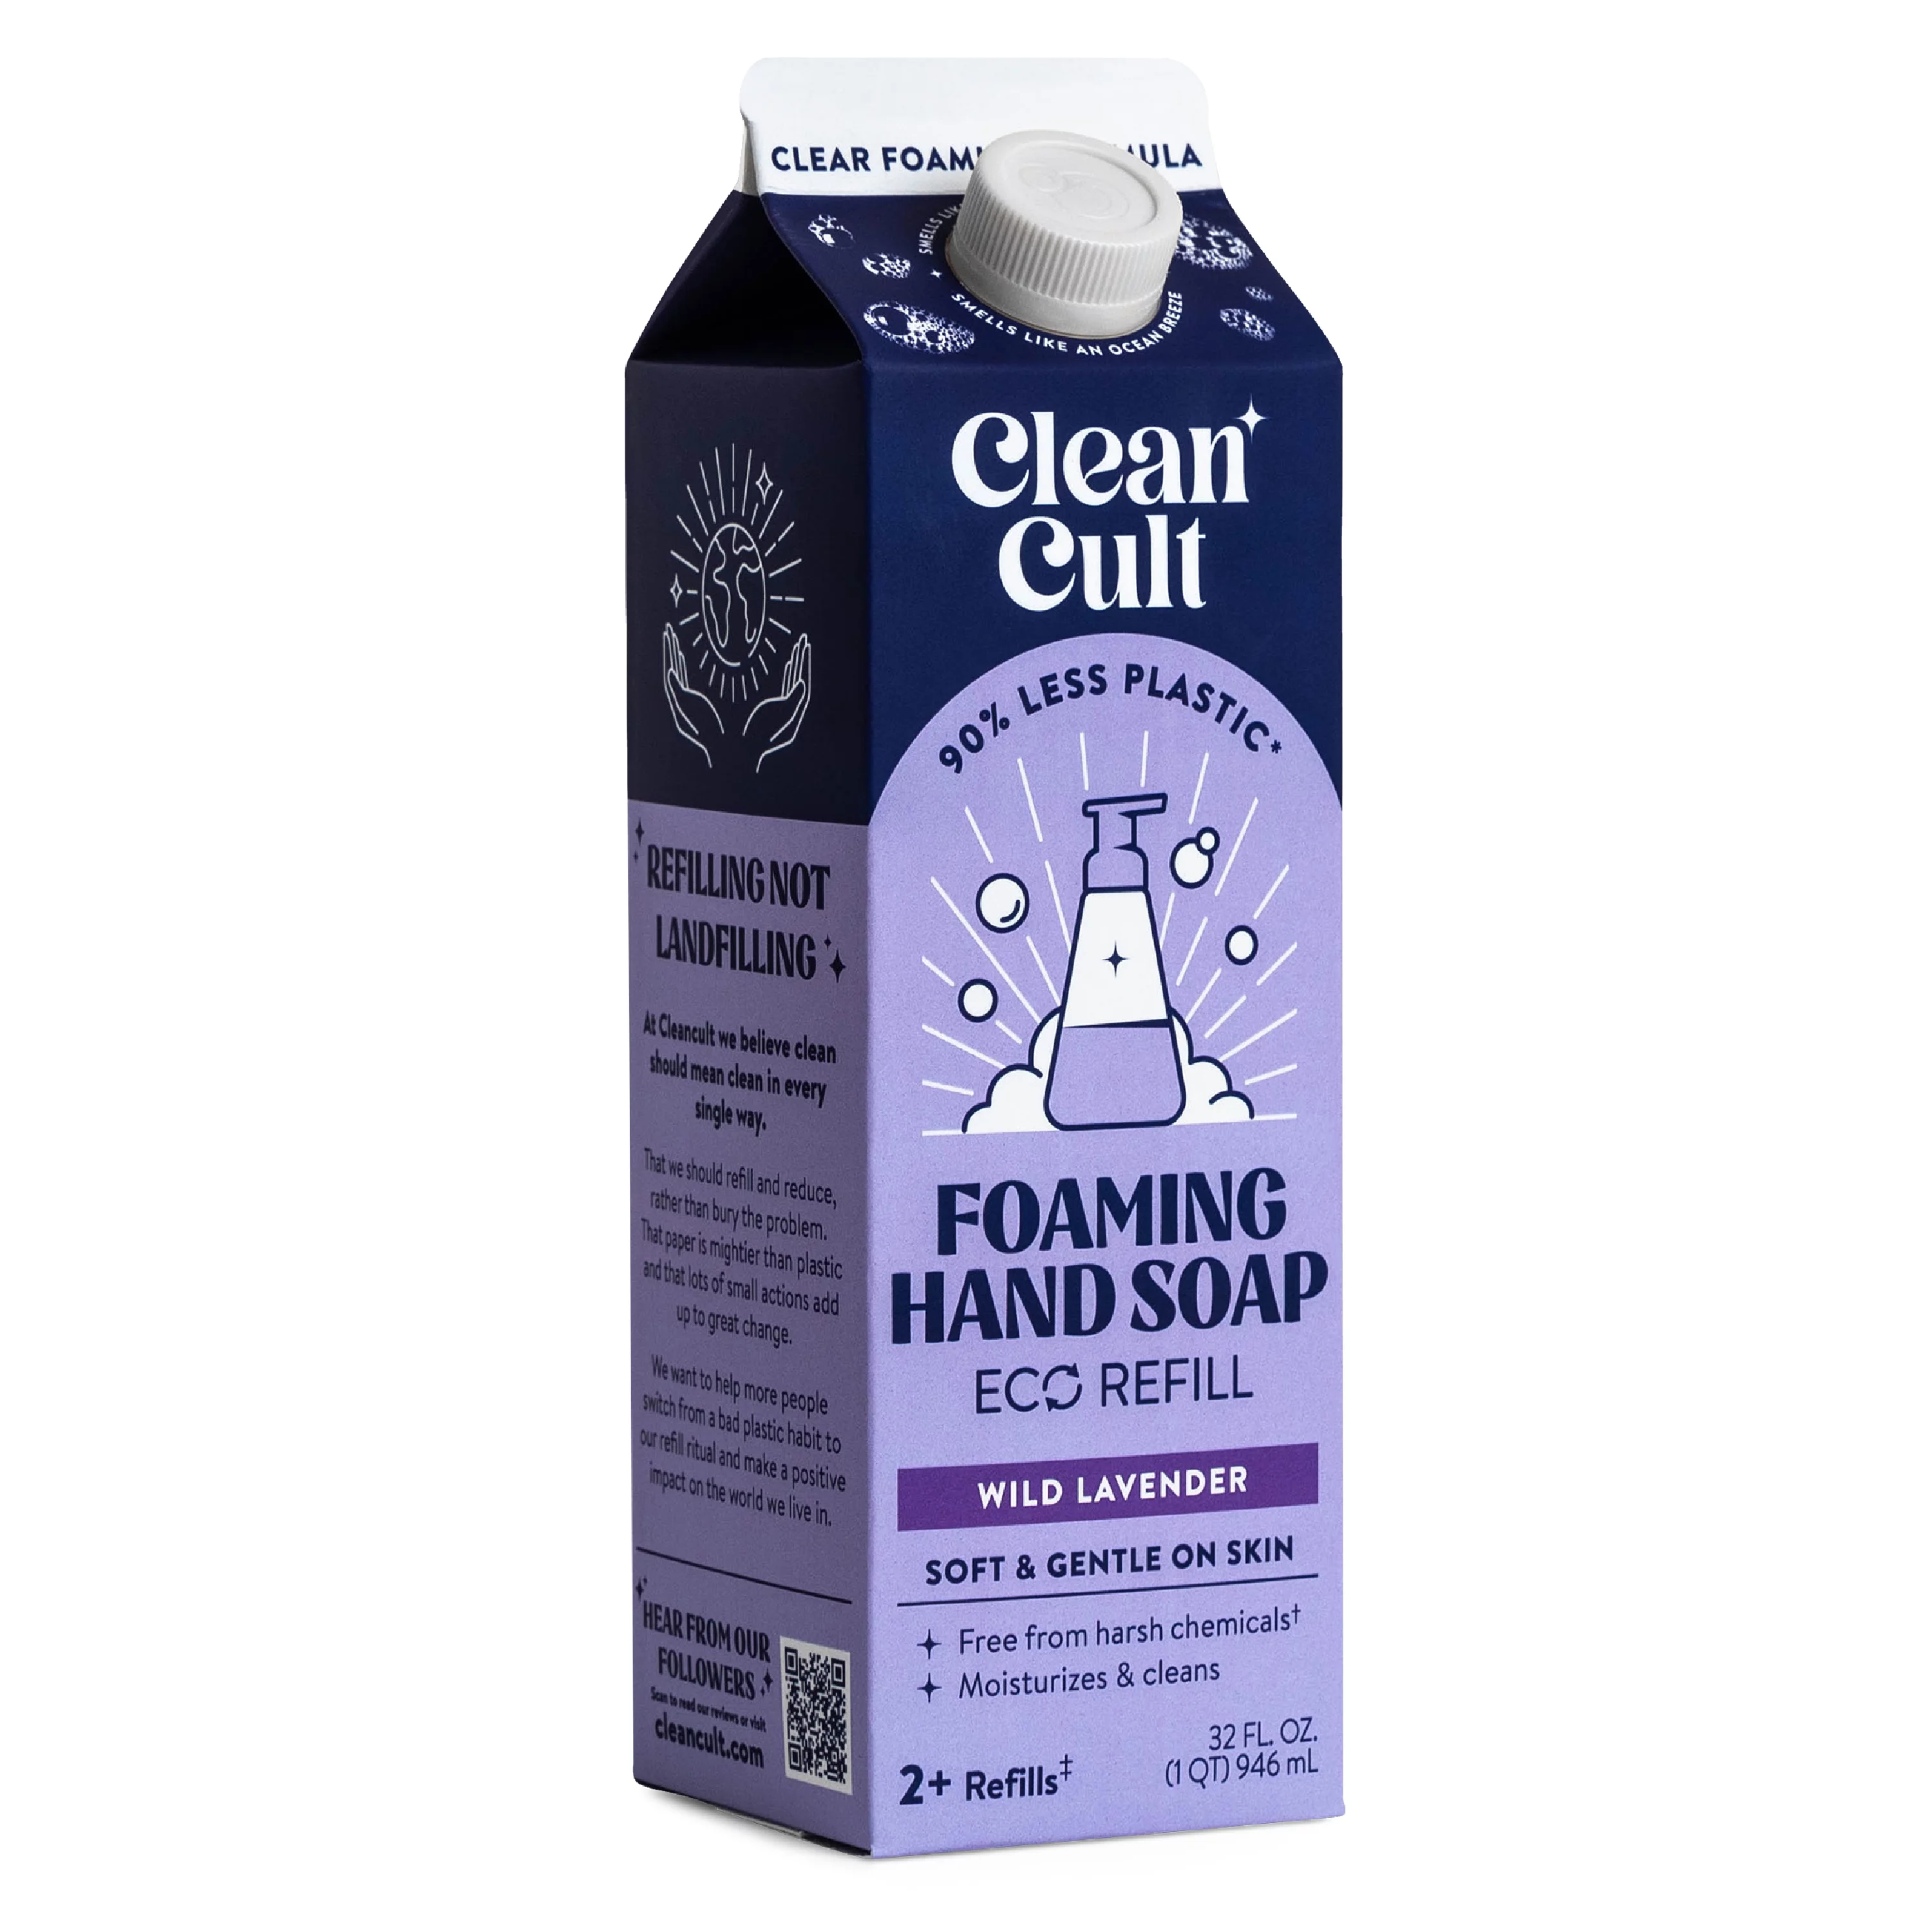 Cleancult Foaming Hand Soap Refills, Nature-Inspired Ingredients, Lavender, 32 fluid oz